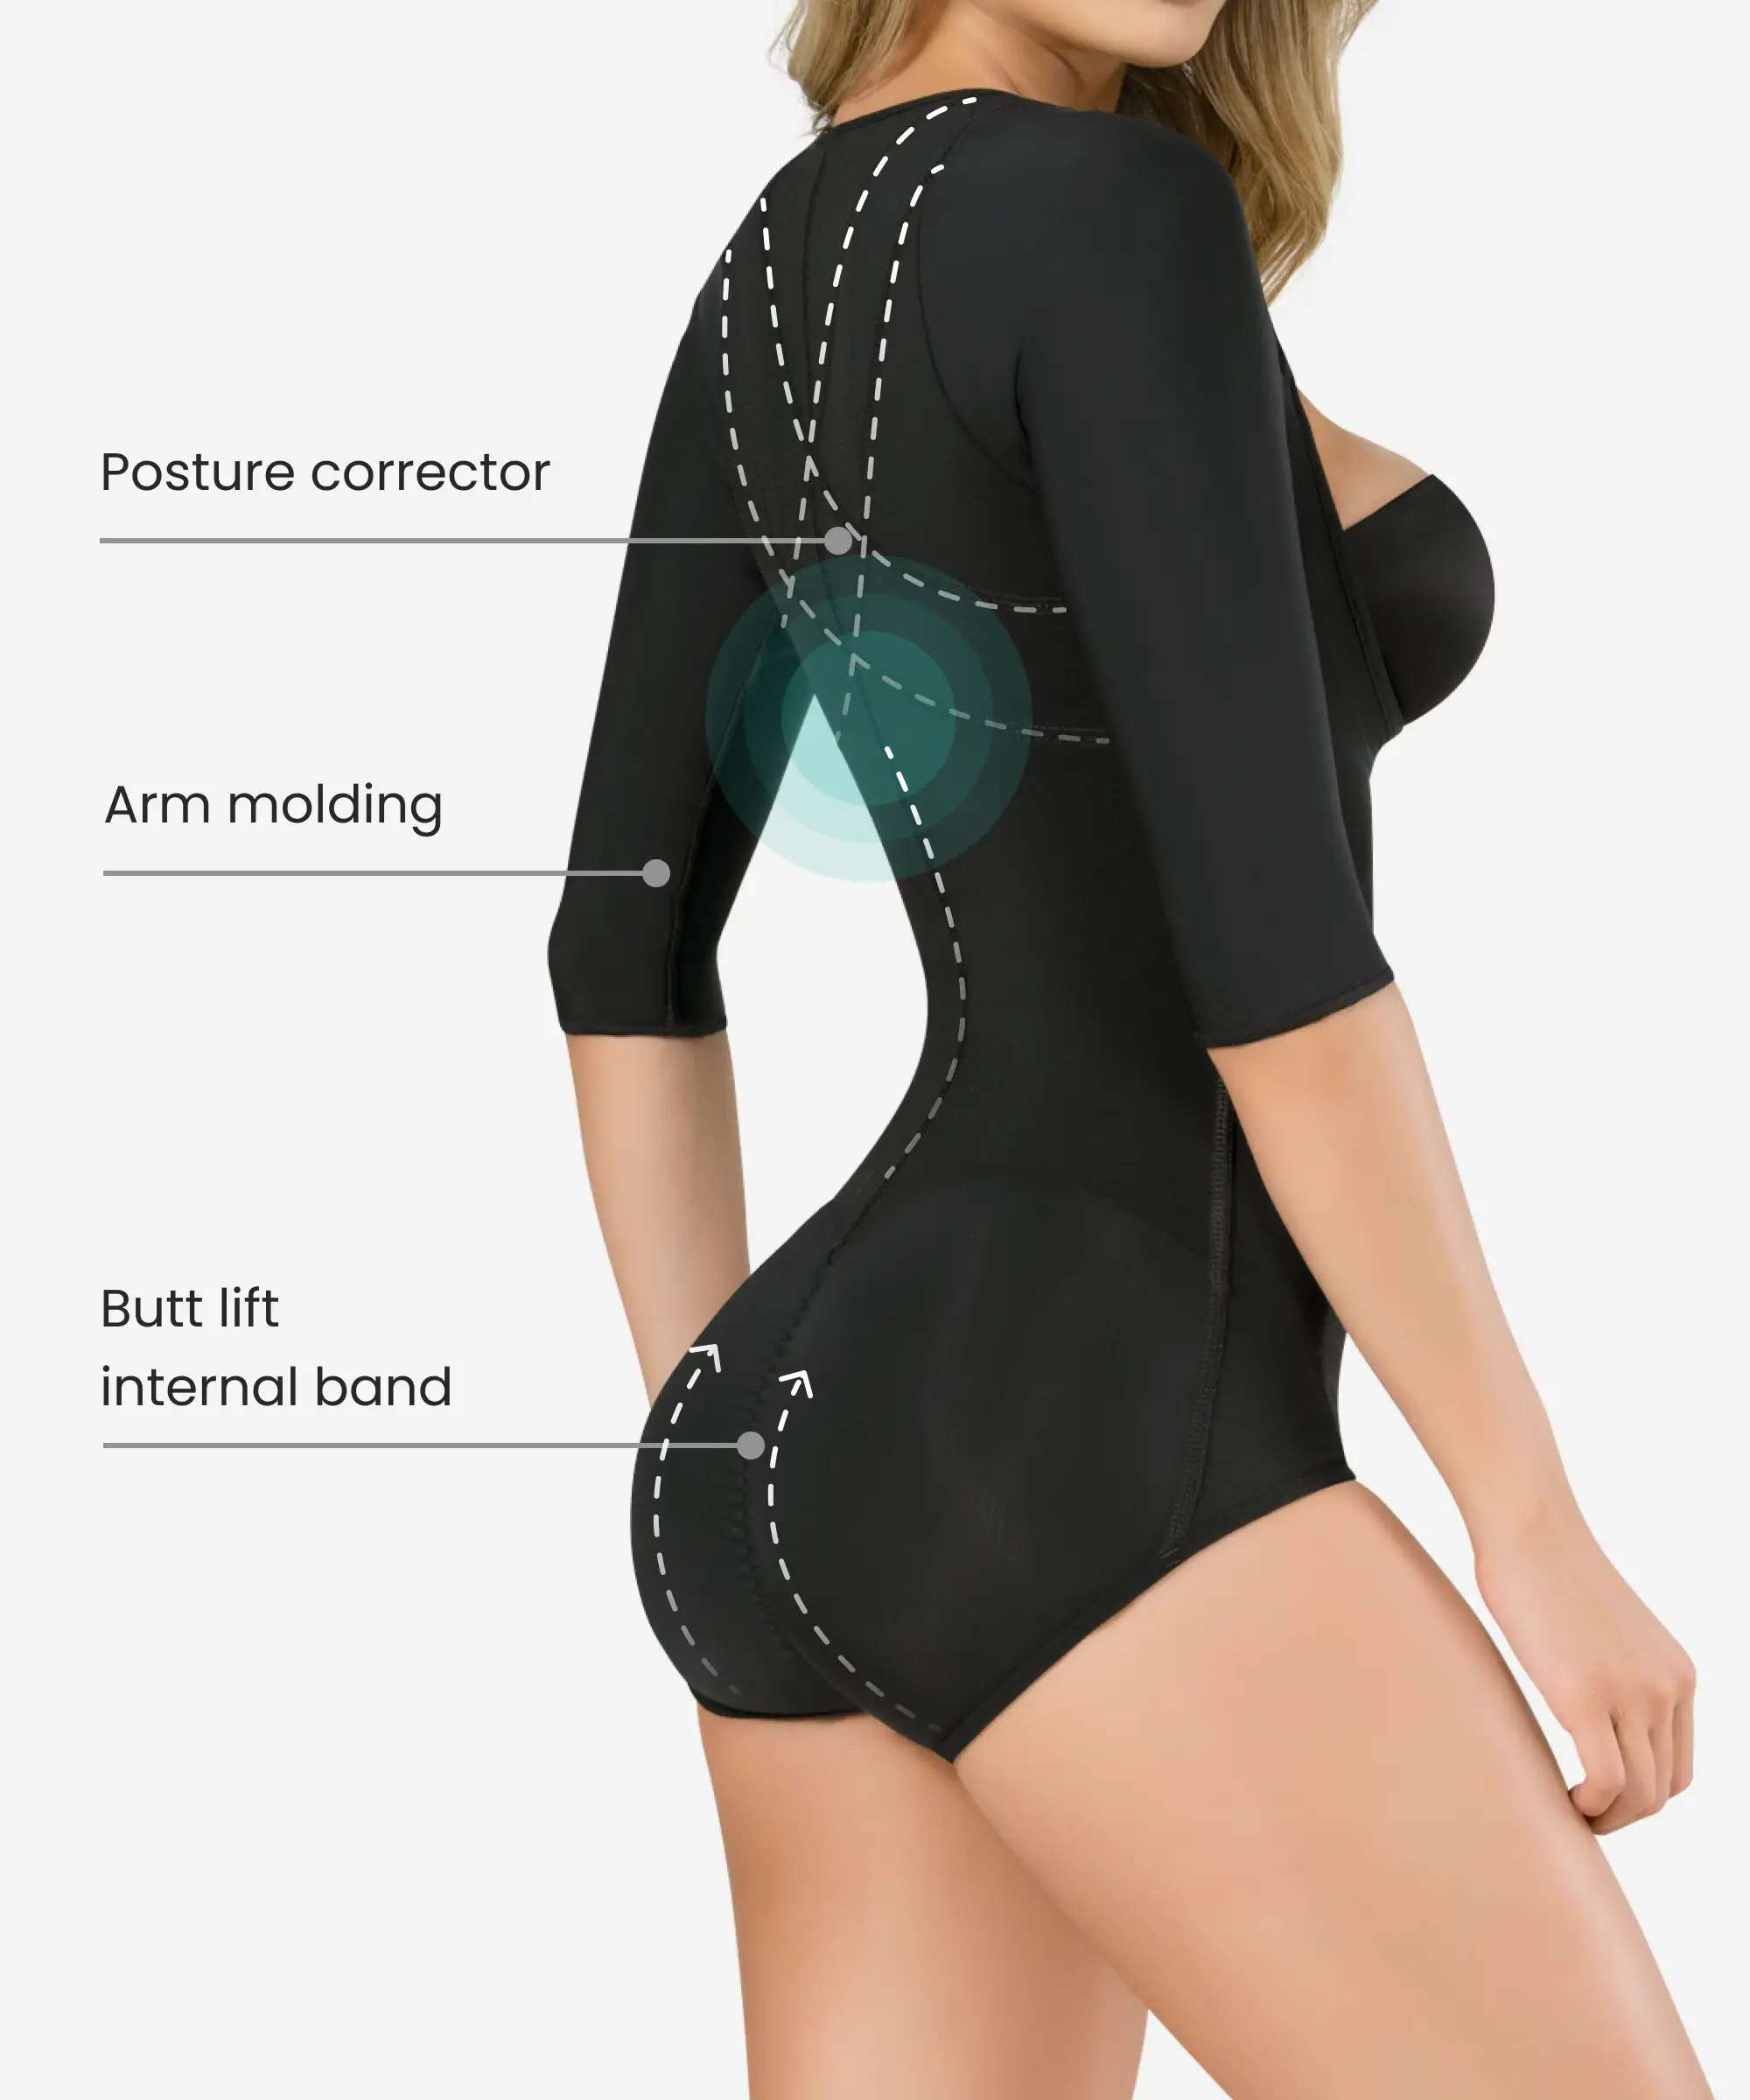 Buy Arms and Abdomen | Body Shaper | Style 286 |DMG Medical Supply